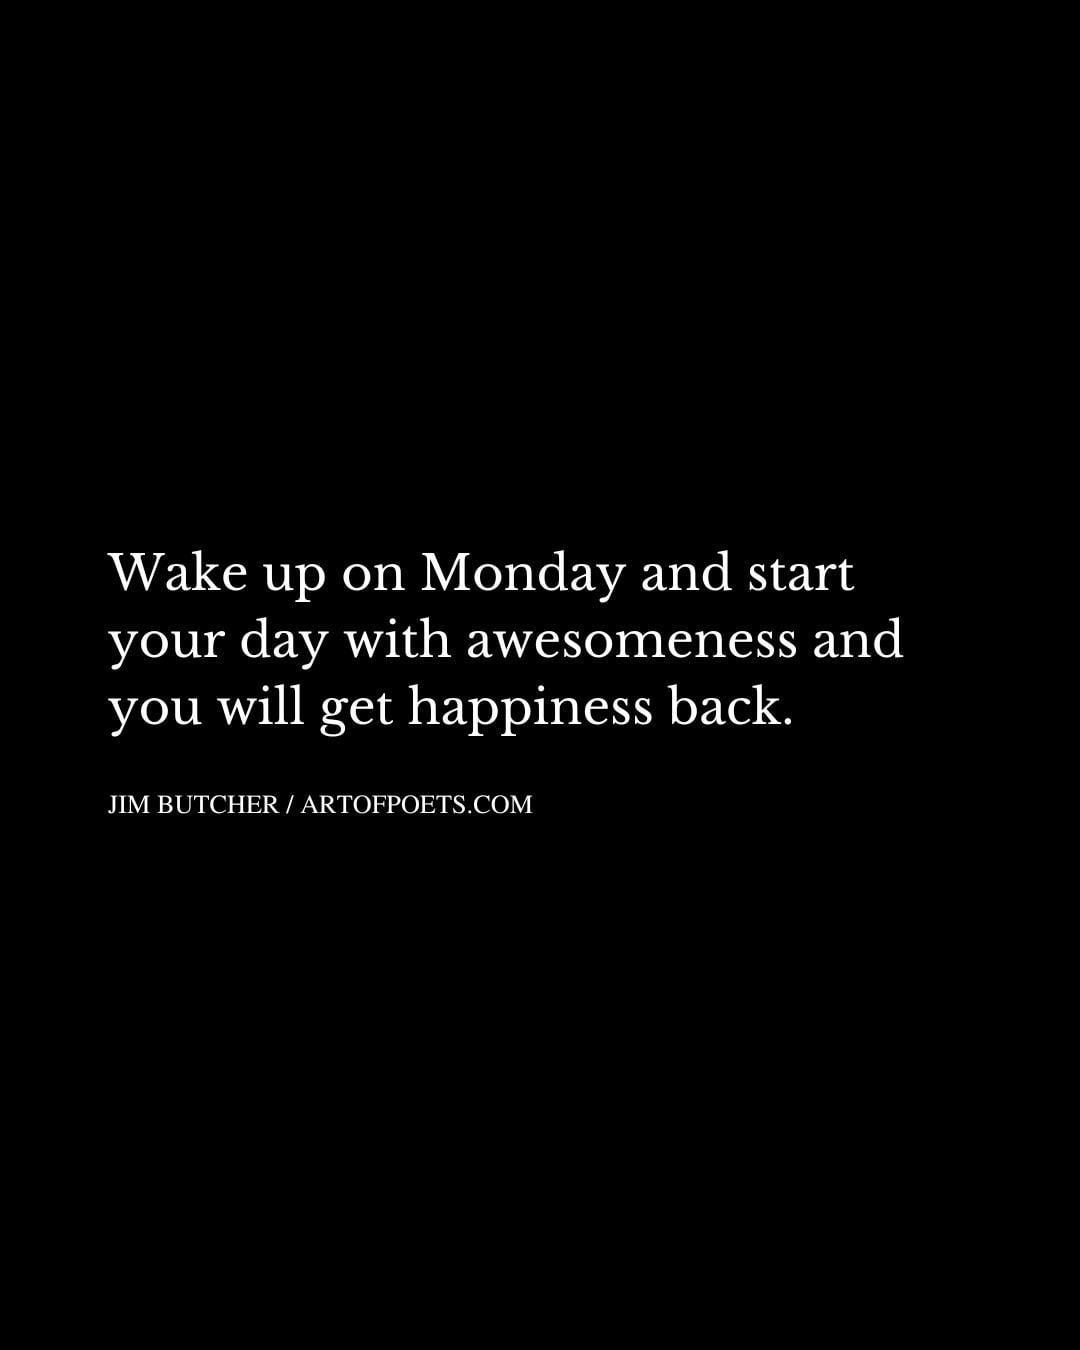 Wake up on Monday and start your day with awesomeness and you will get happiness back